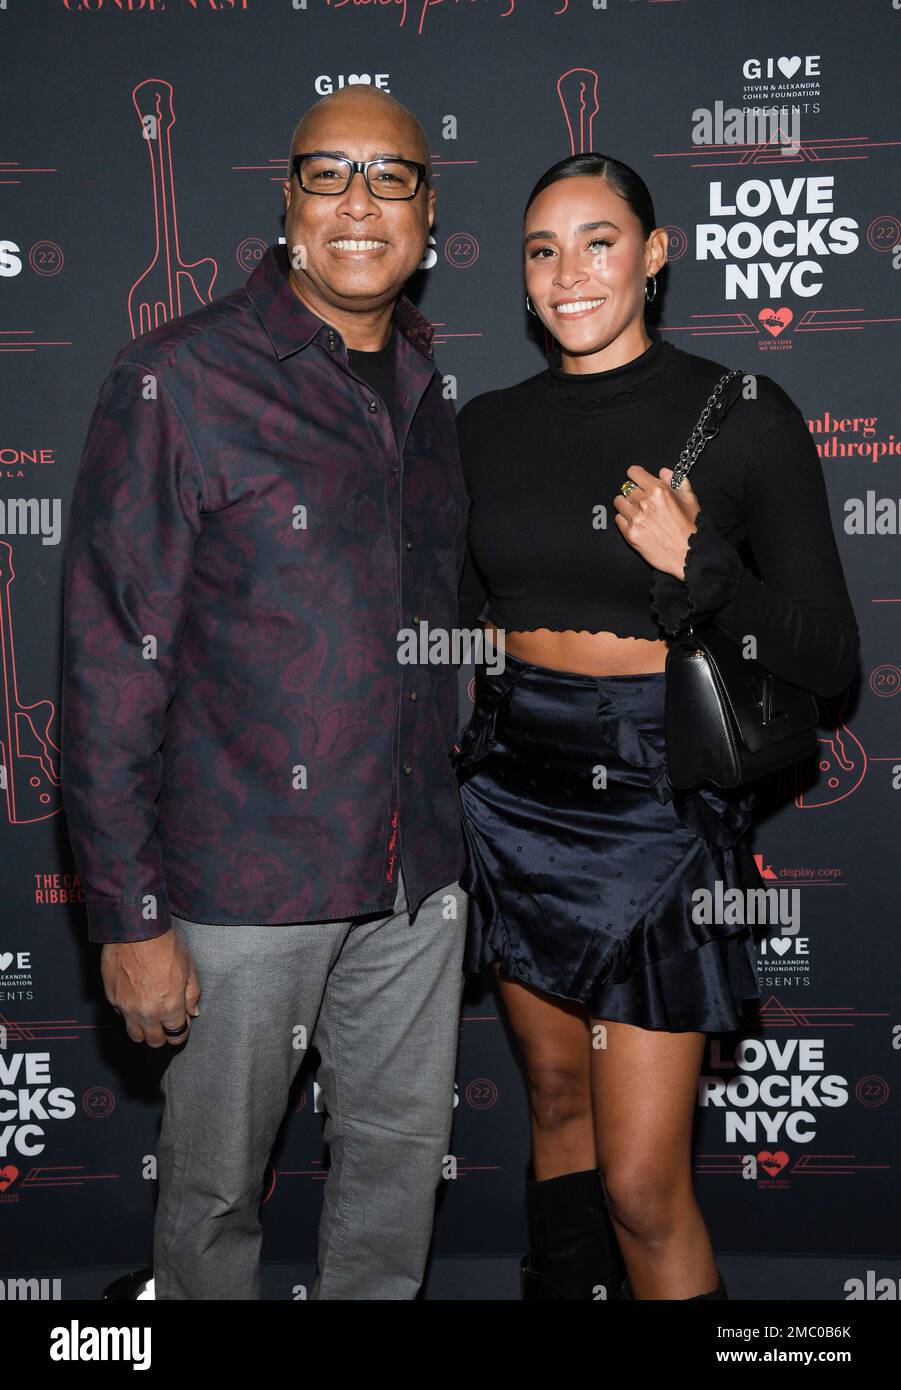 March 9, 2023, New York City, New York, USA: Former baseball  player/musician BERNIE WILLIAMS and his wife WALESKA WILLIAMS seen during  the red carpet arrivals for the Seventh Annual Love Rocks NYC